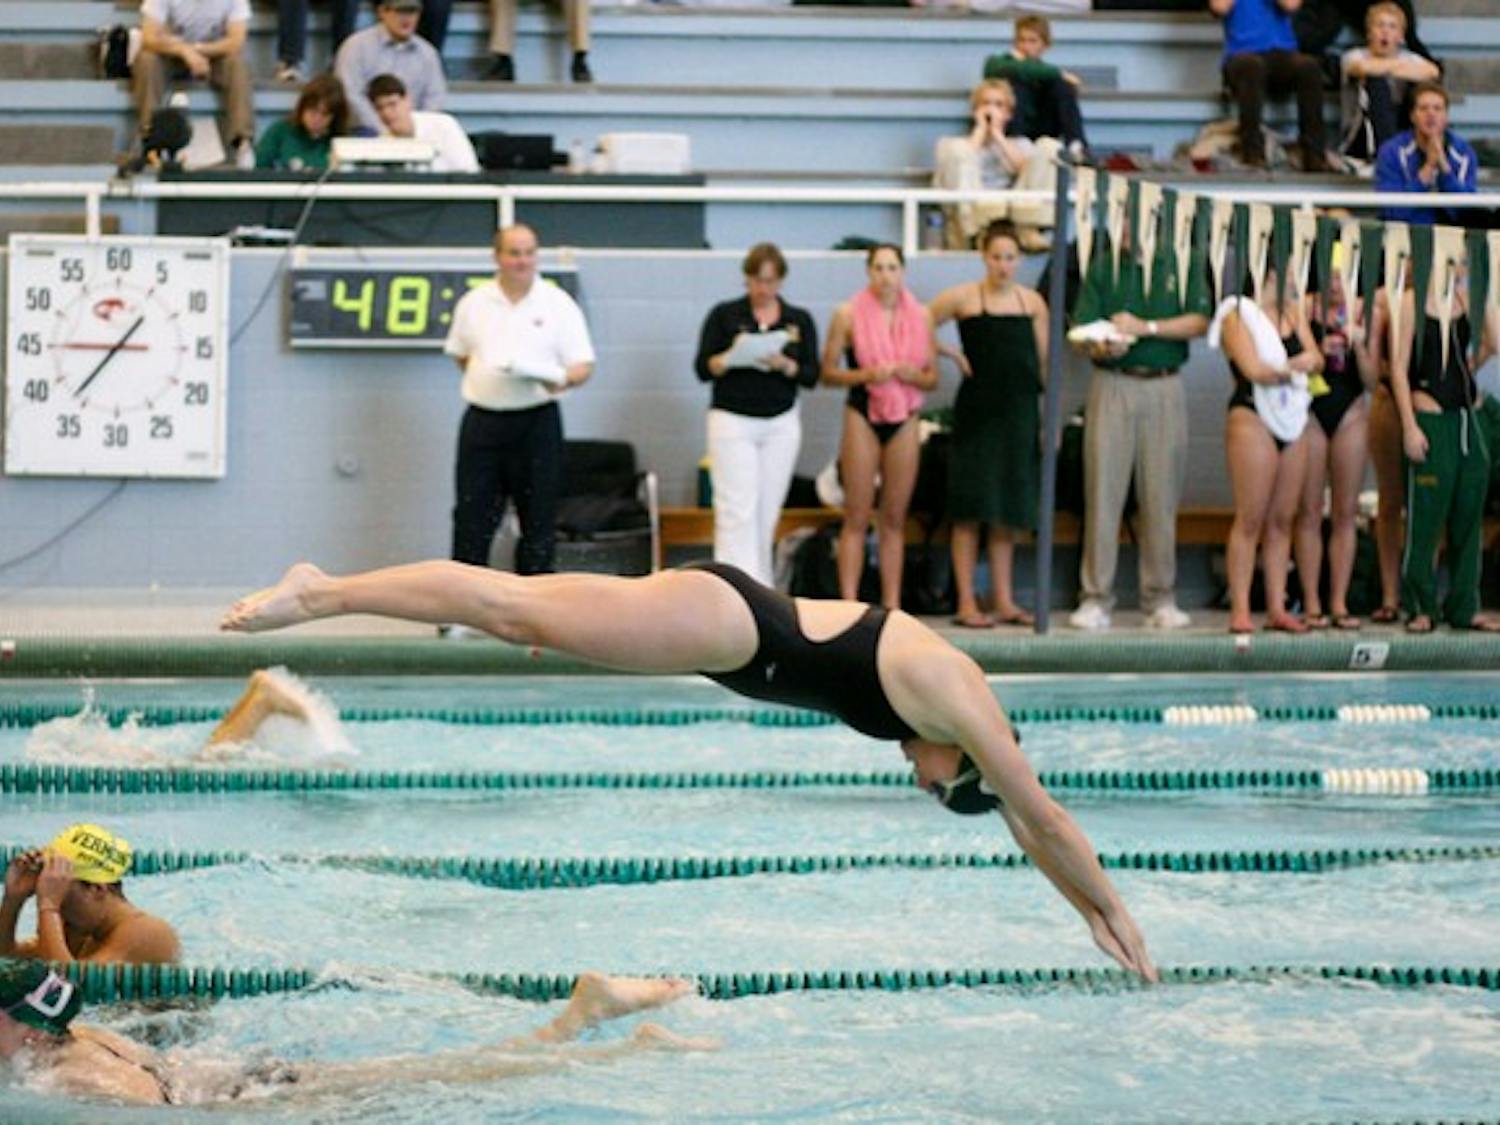 The Big Green women's swimming and diving team defeated Vermont 168-132 in Hanover this weekend.